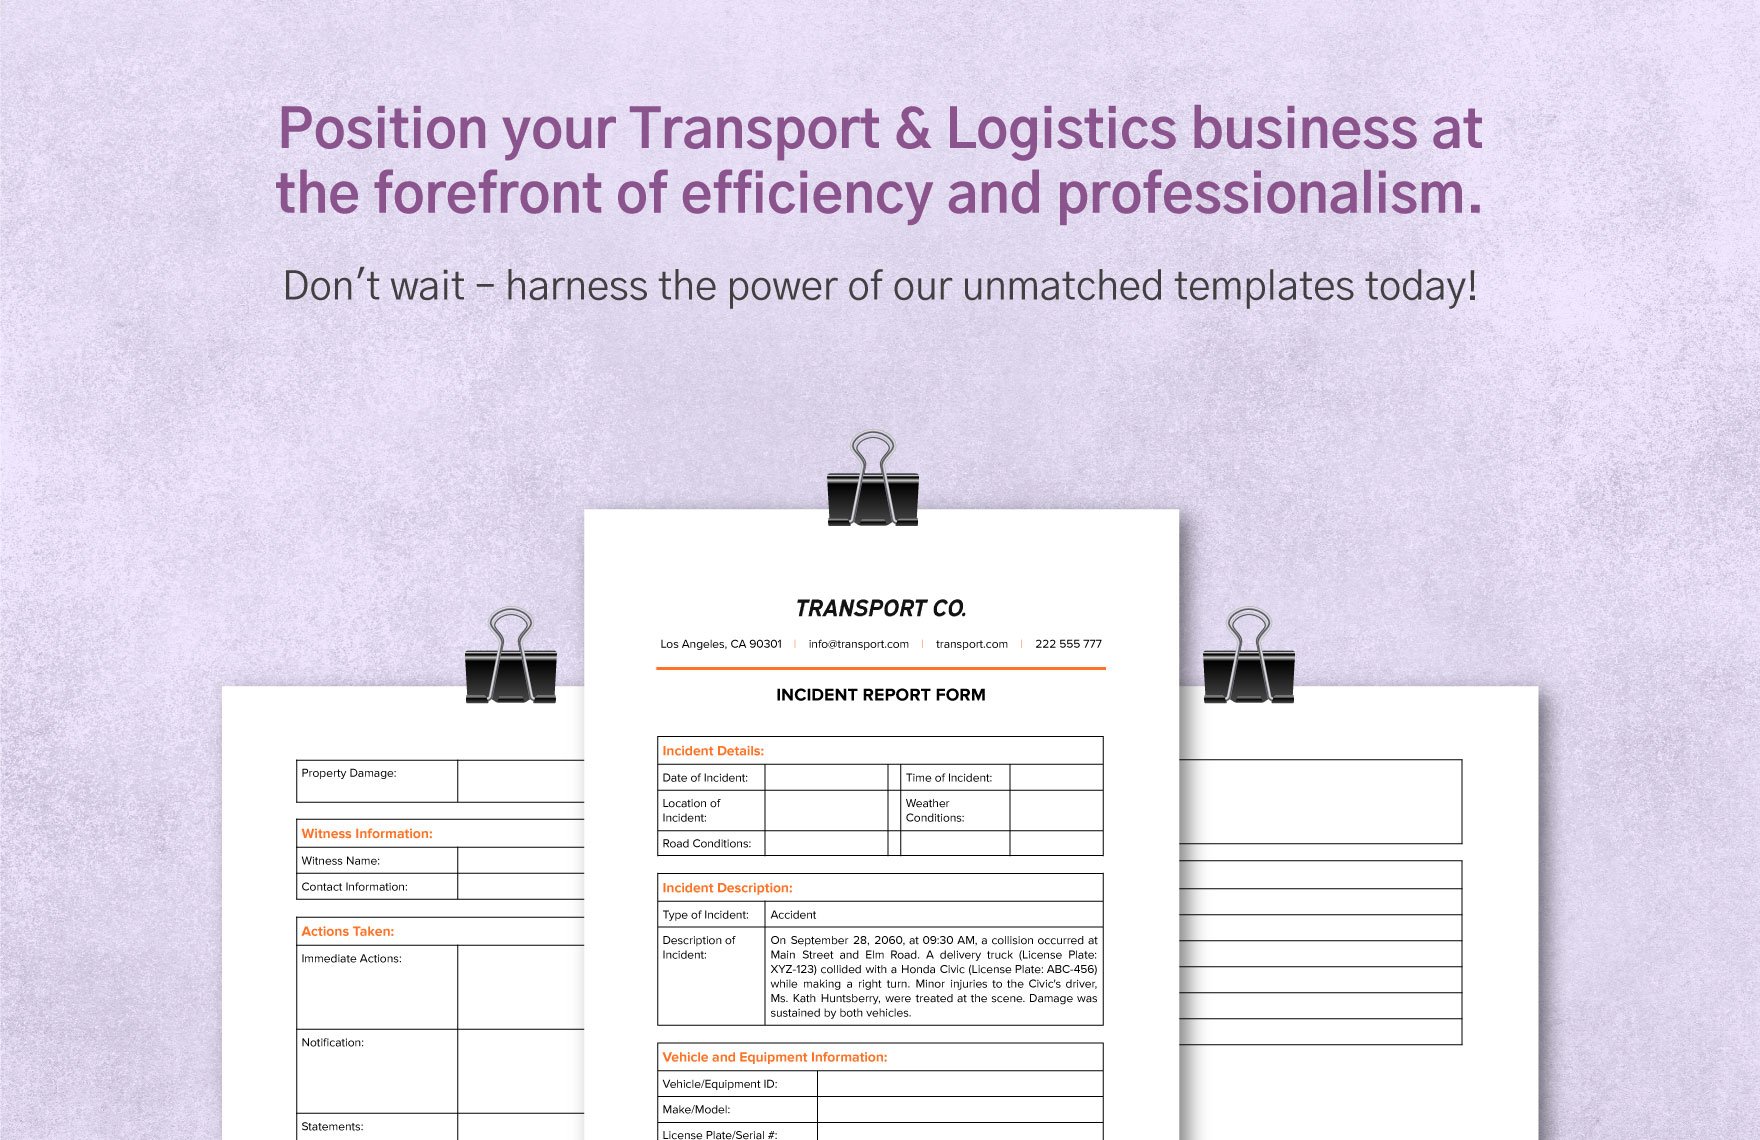 Transport and Logistics Incident Report Form Template